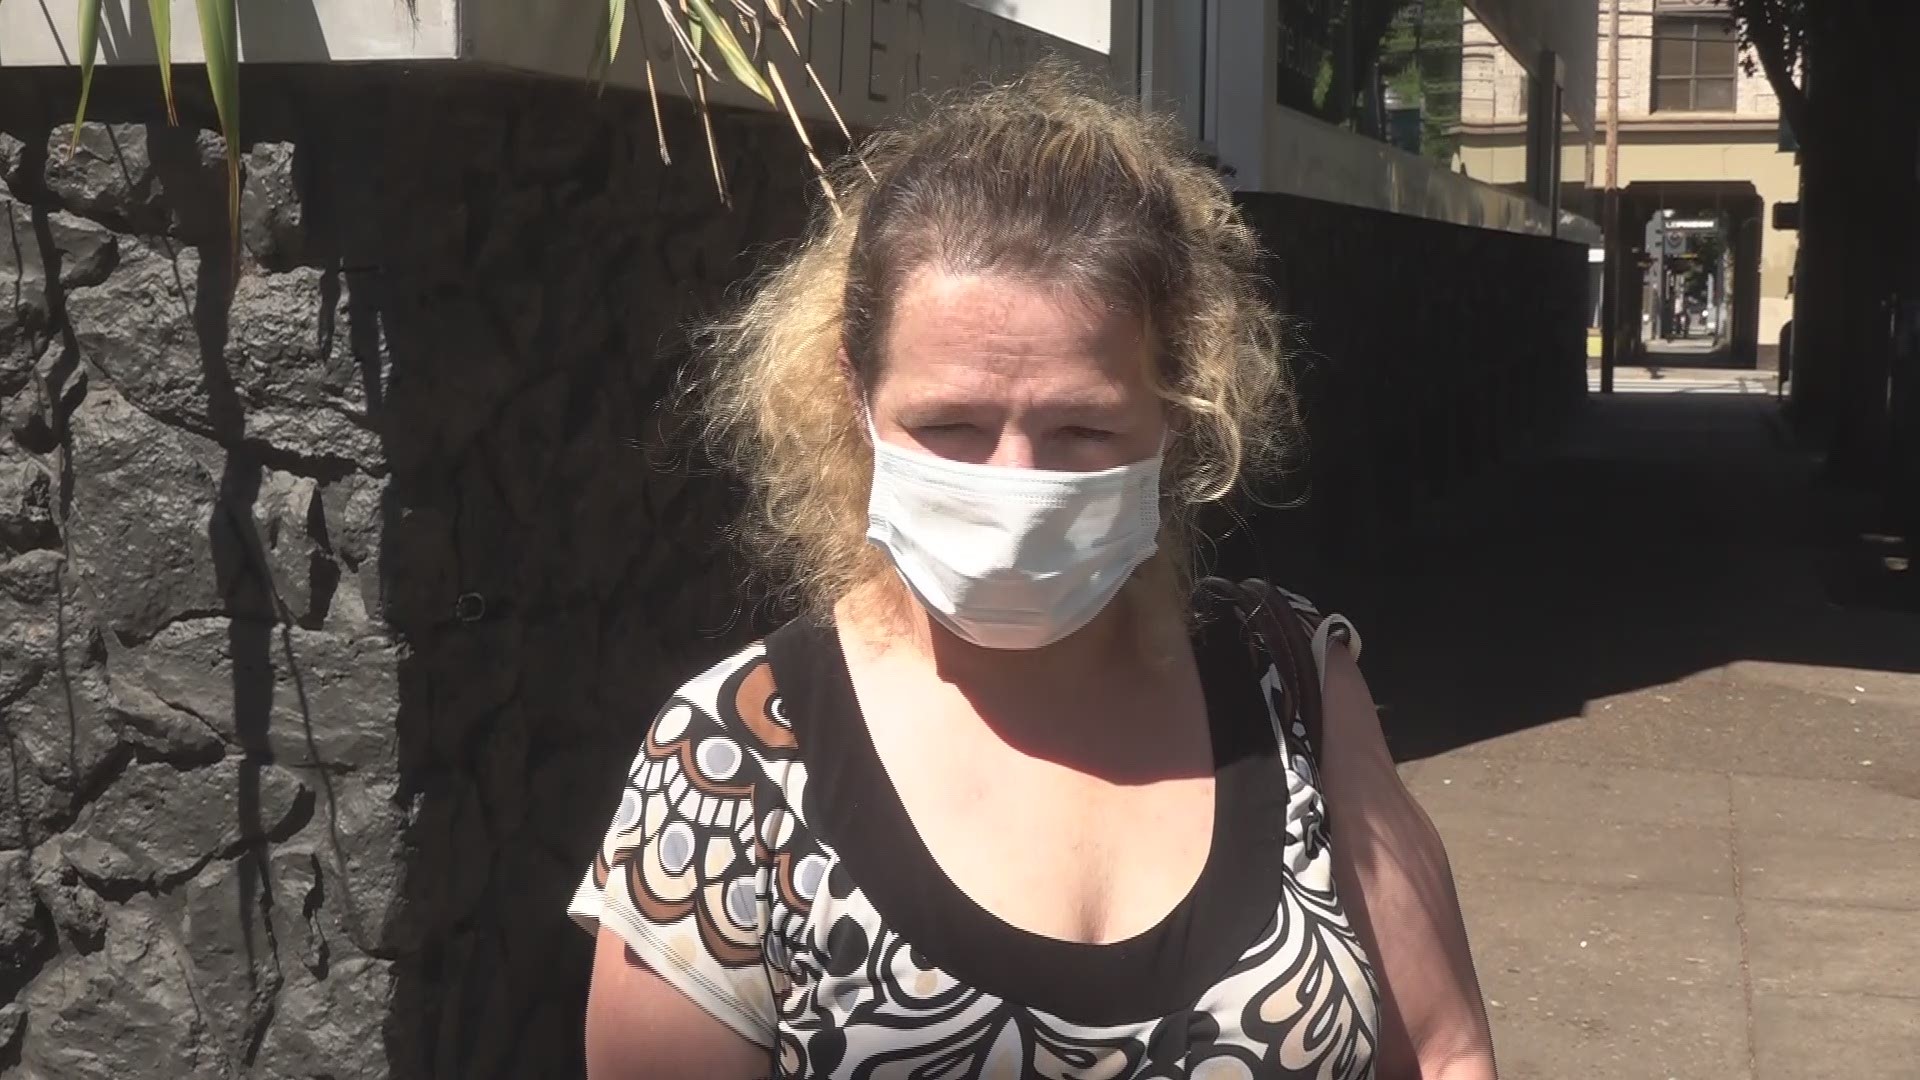 For over a year, people who are homeless and got COVID were able to quarantine at a few Portland hotels. Bryant Clerkley reports on how long that will continue.